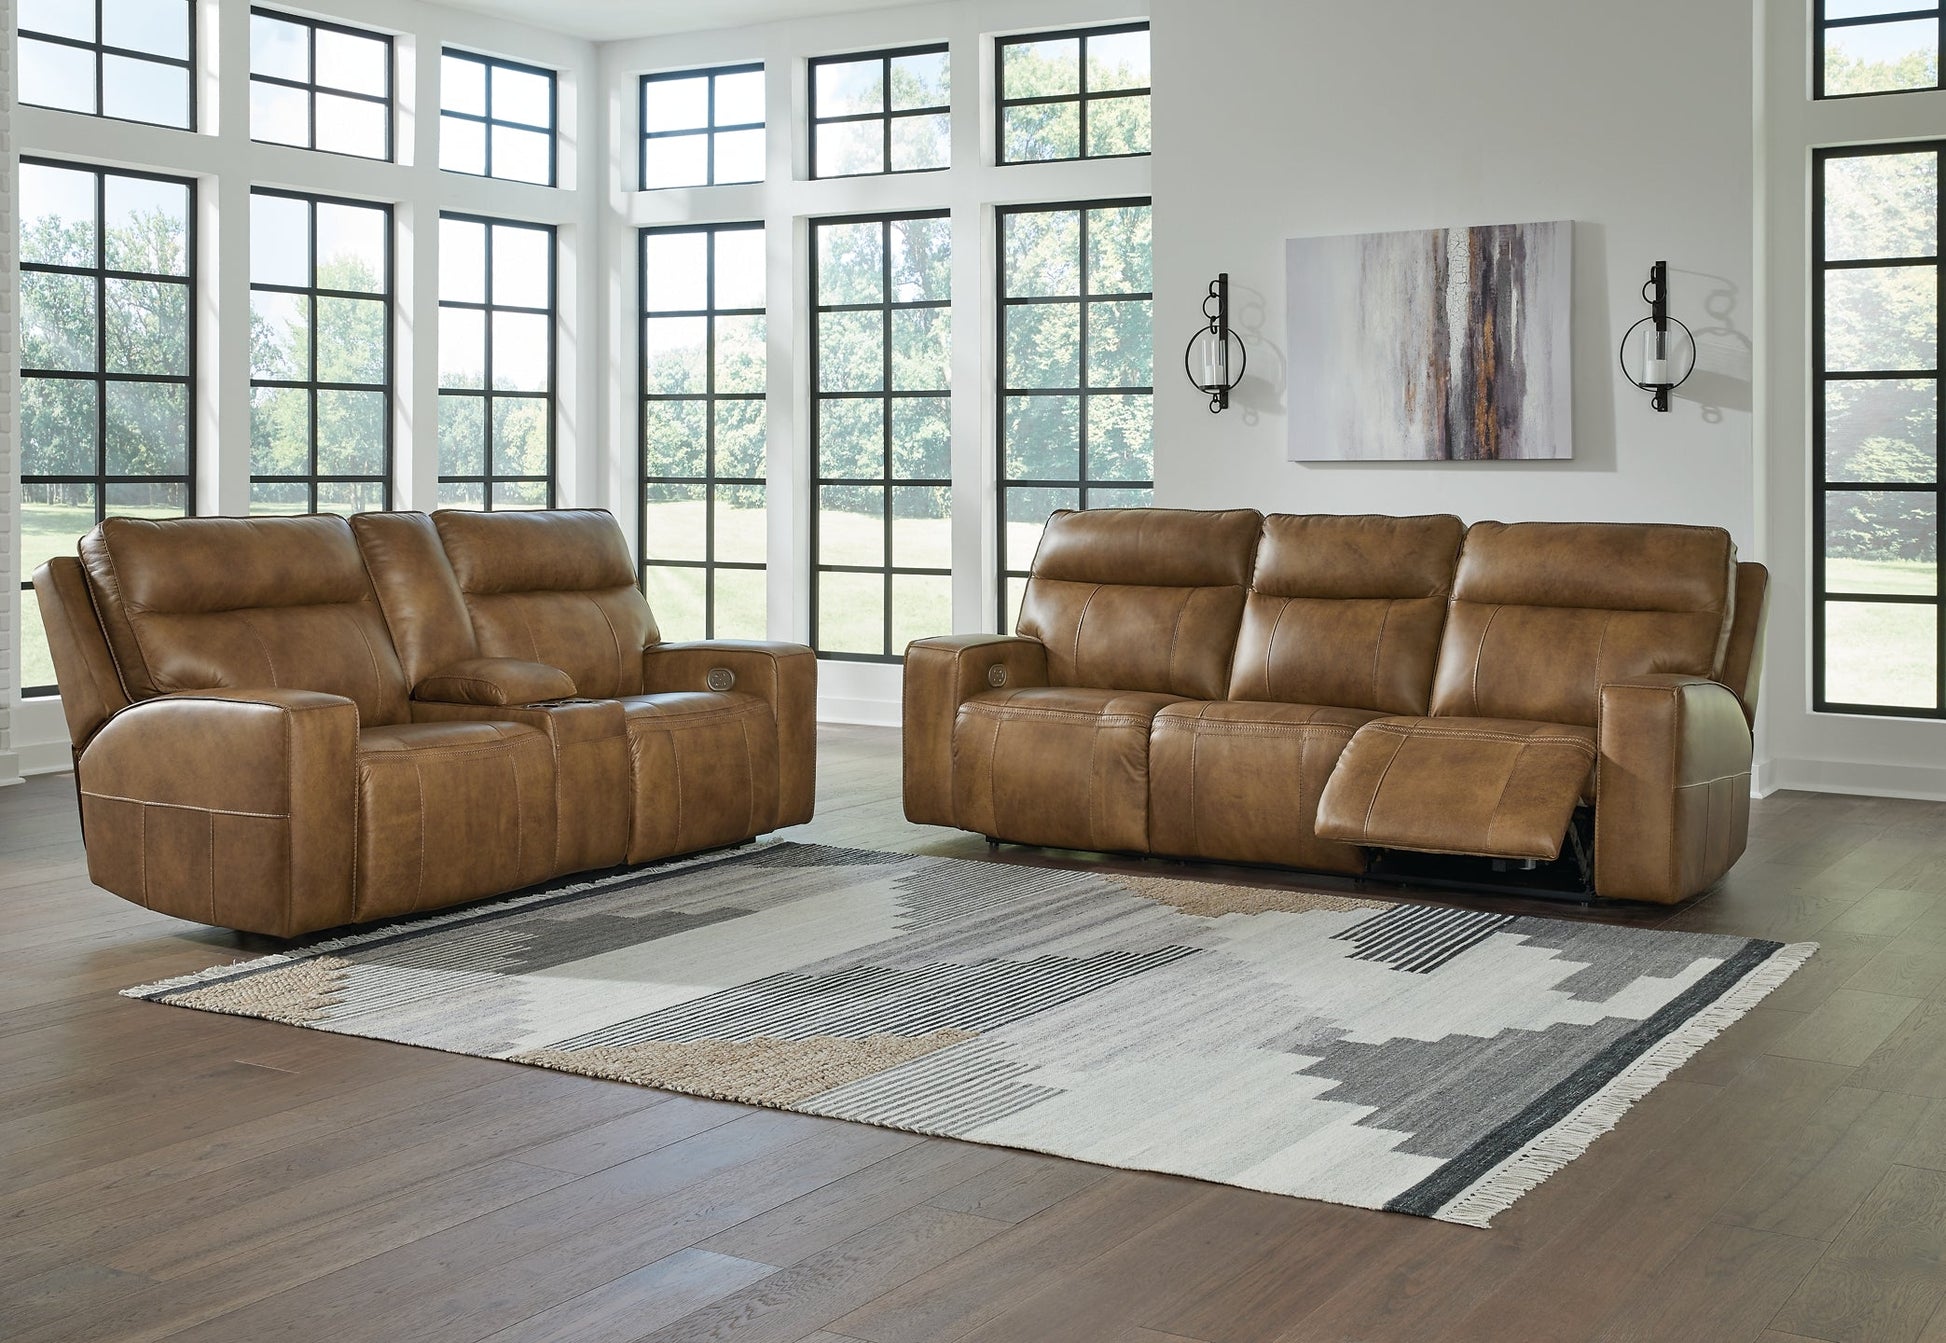 Game Plan Sofa and Loveseat at Walker Mattress and Furniture Locations in Cedar Park and Belton TX.